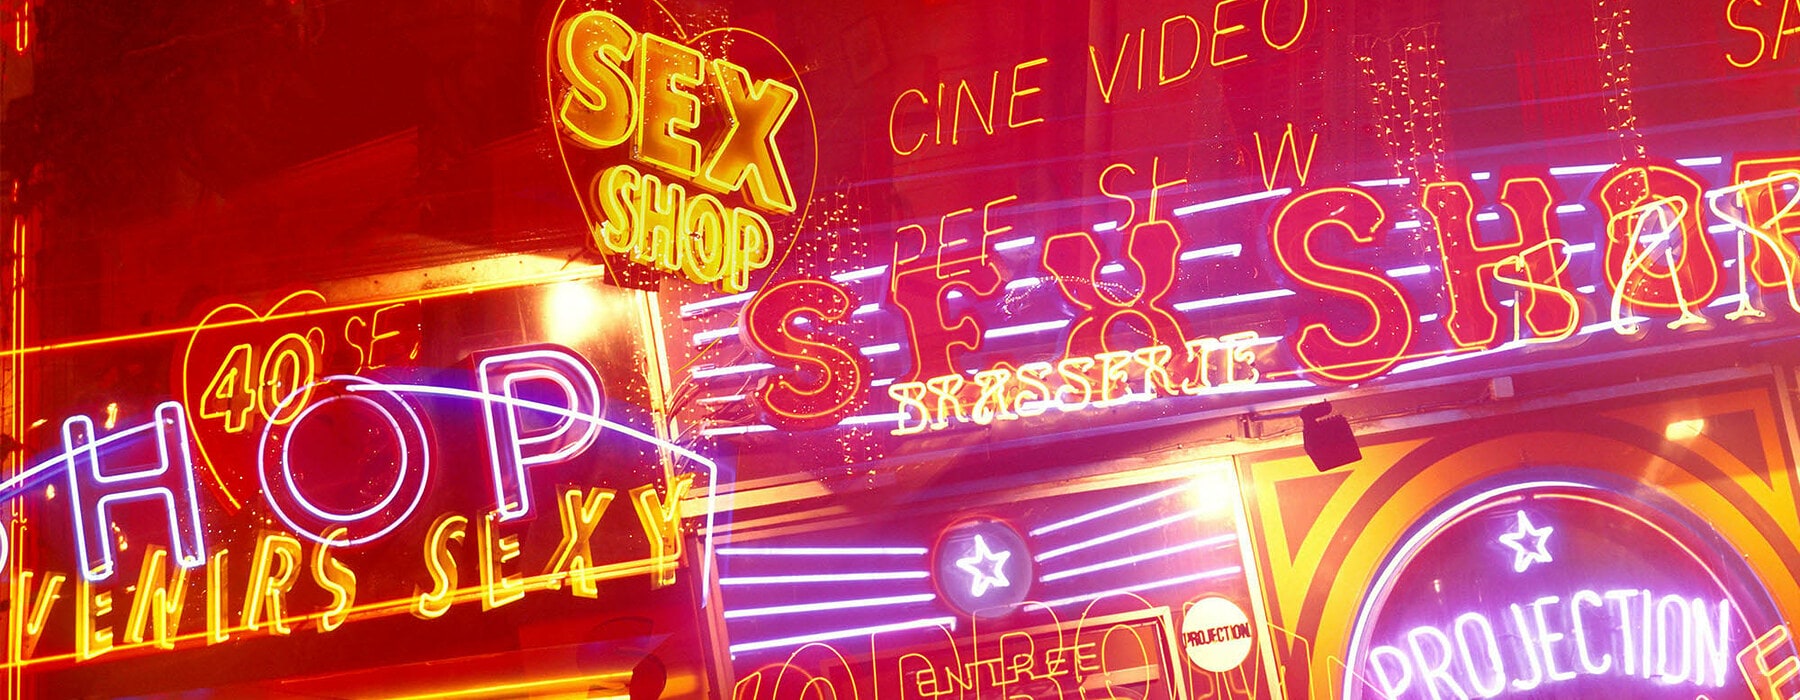 Neon lights at the red light district of Paris, France.